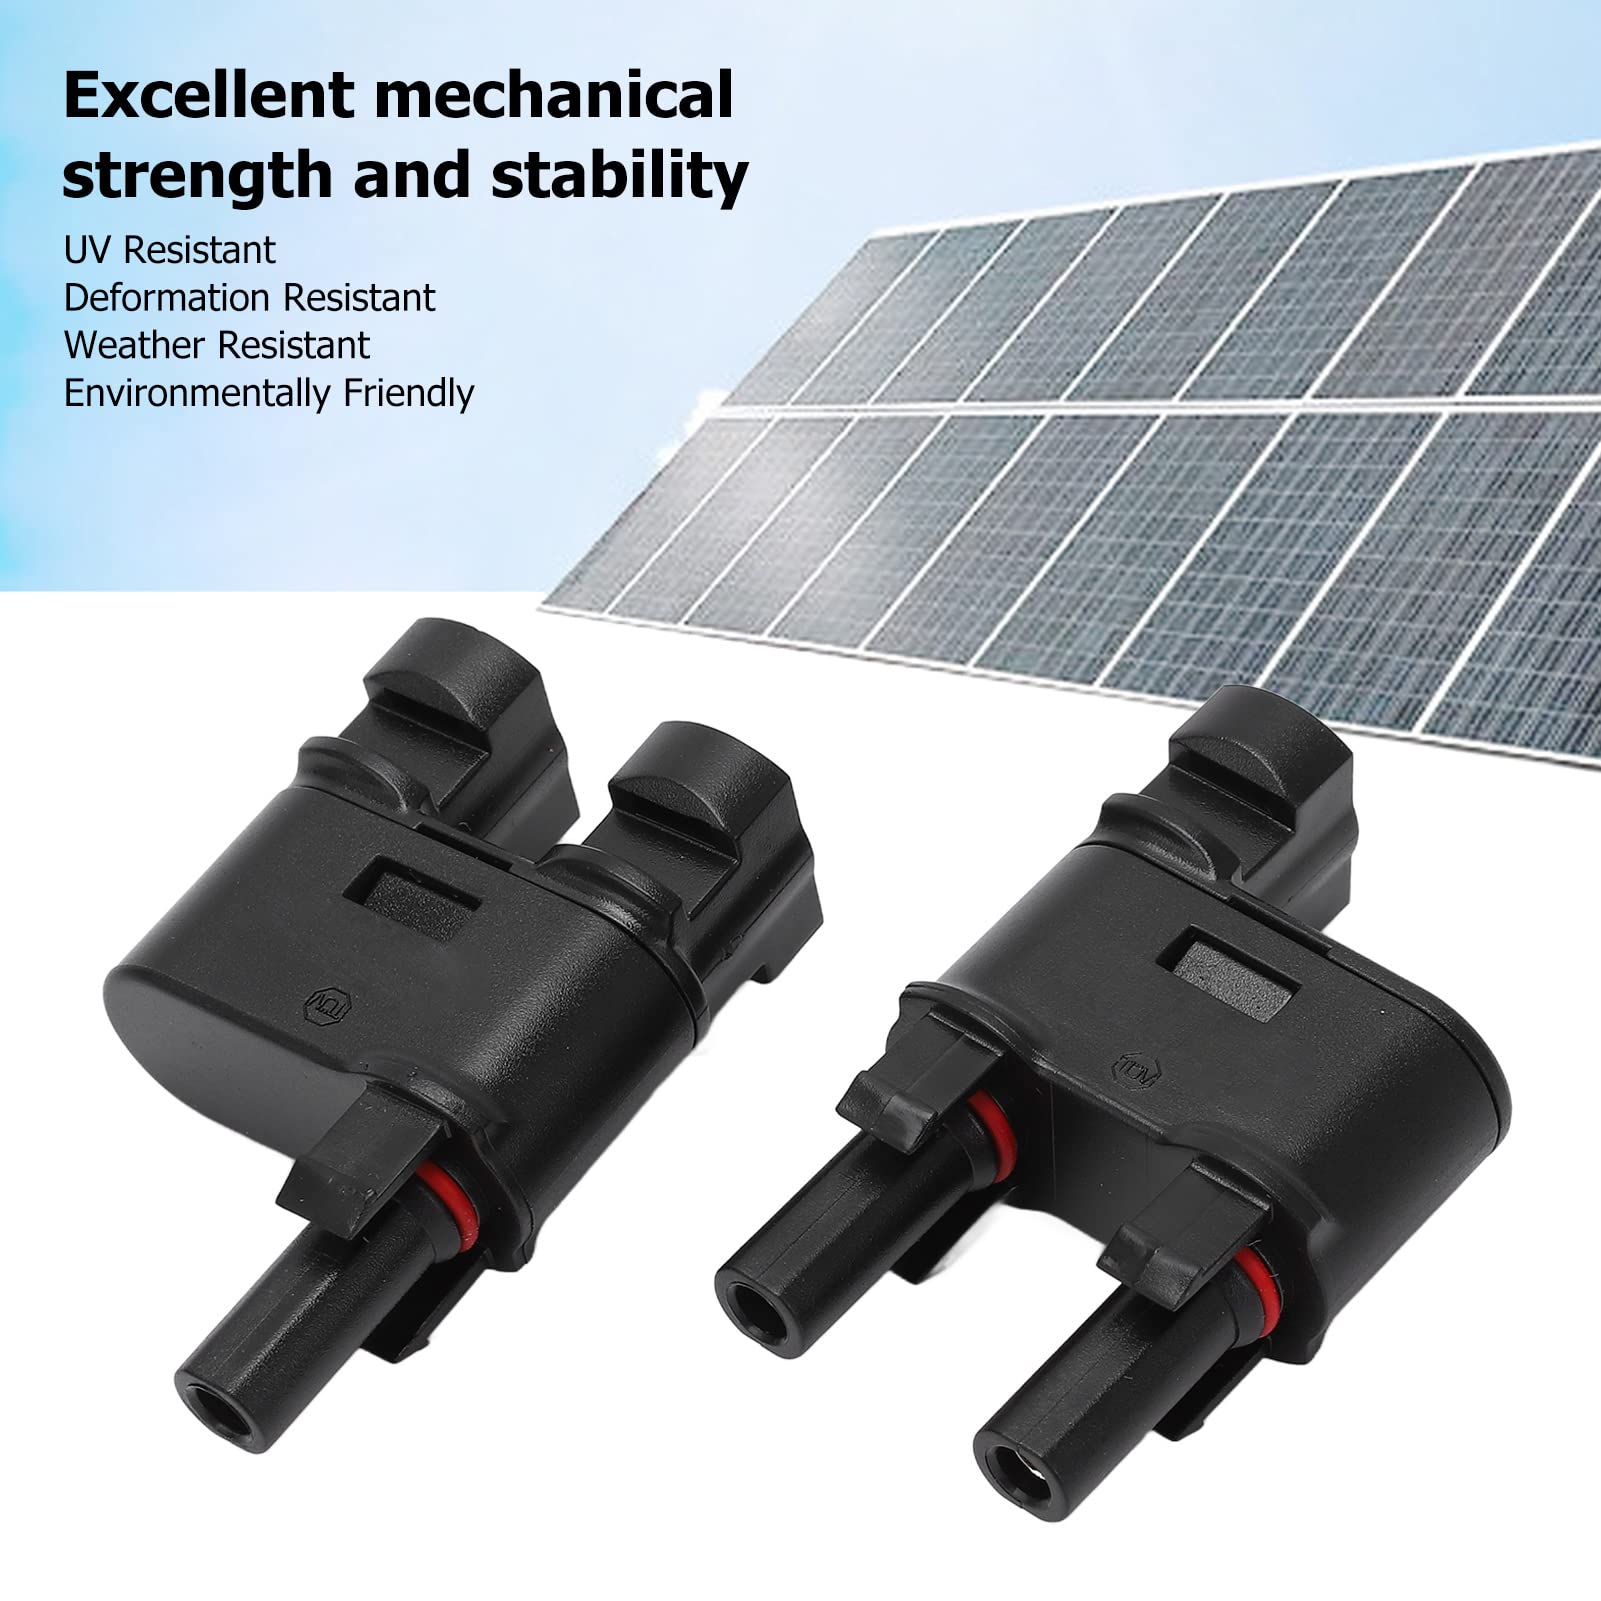 Pv Connector Solar Pv Connector 2pcs Solar Pv Connector 2 to 1 Photovoltaic Crimp Connector for Dc Cable Bus Series Connection